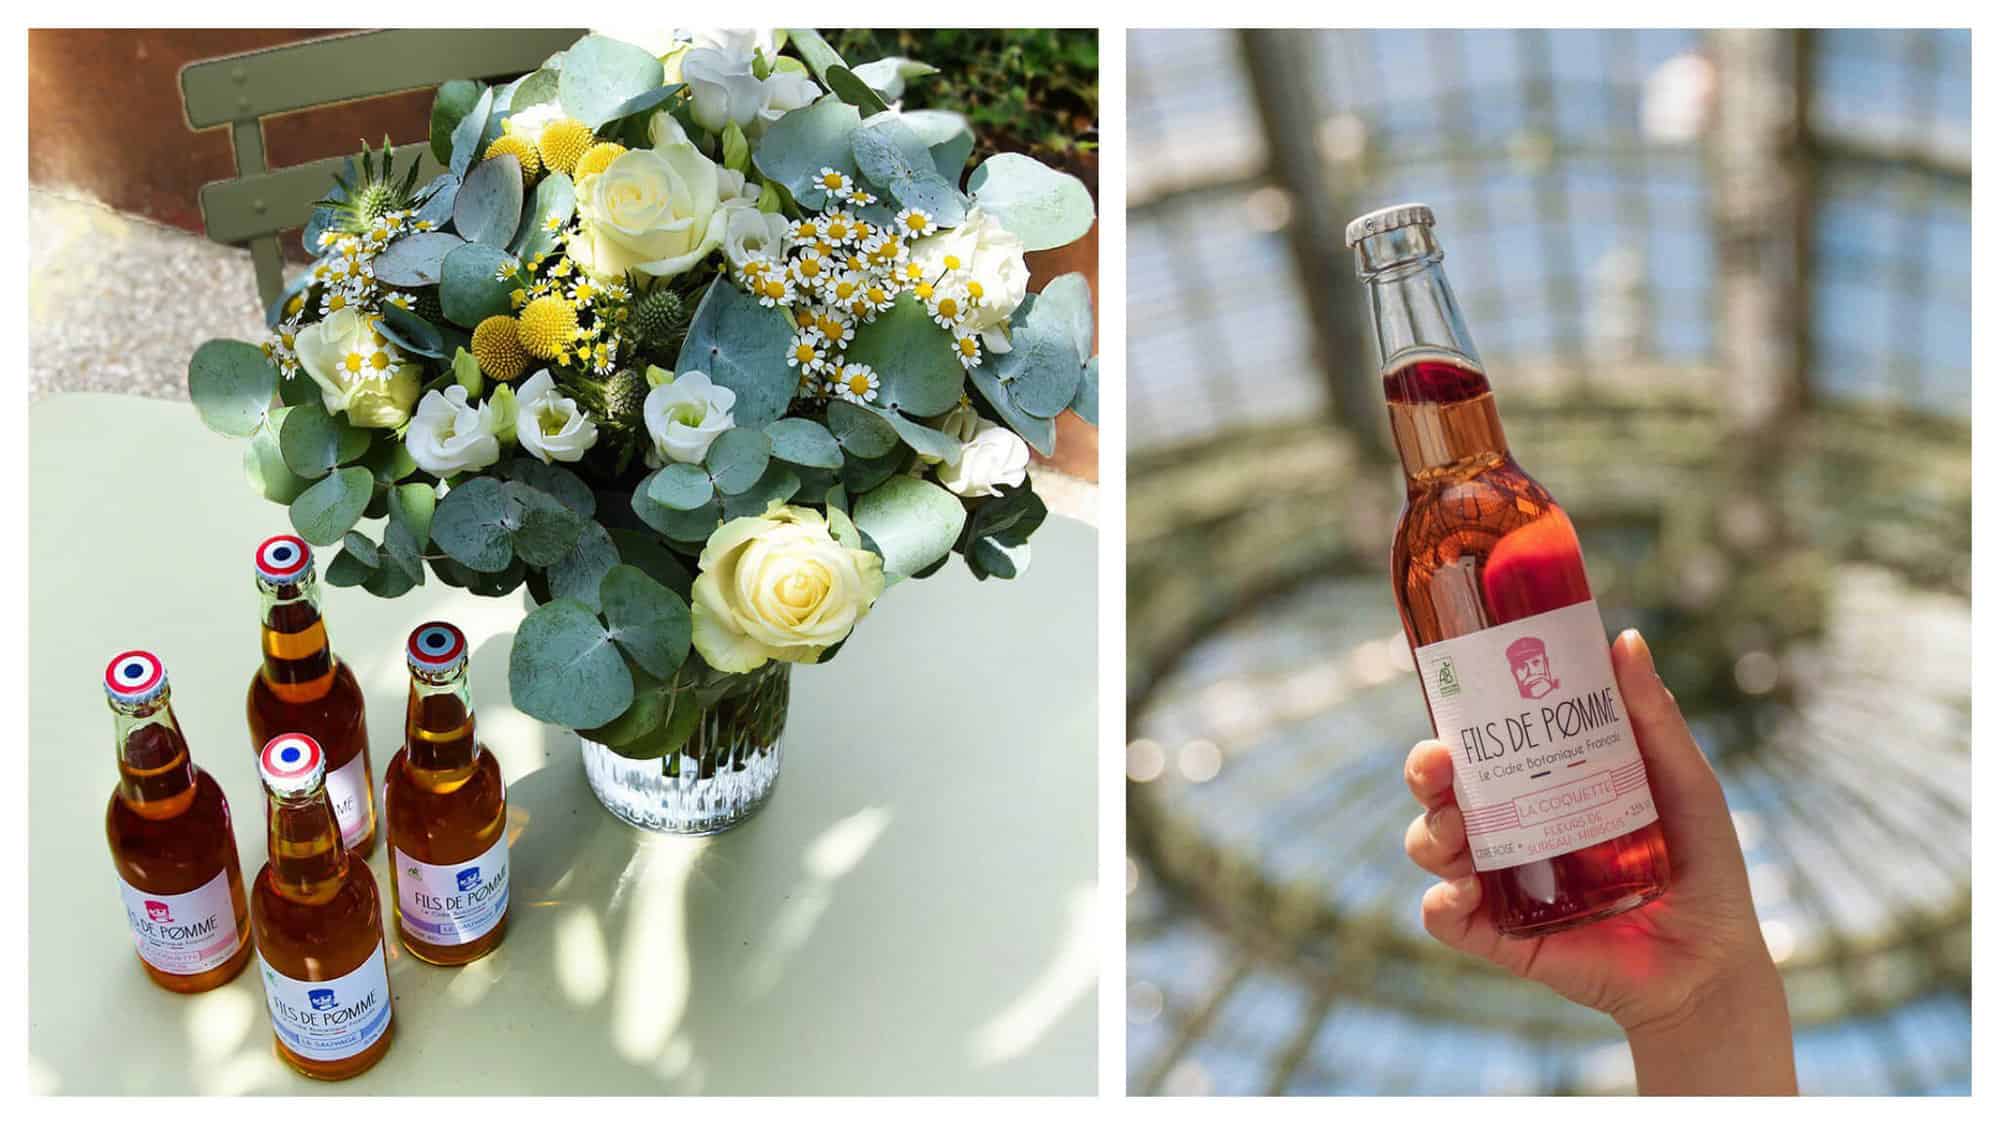 Left: bottles of Fils de Pomme cider on a pale green outdoor table with a vase of flowers.
Right: a hand holding a bottle of Fils de Pomme cider under the roof of Grand Palais. 